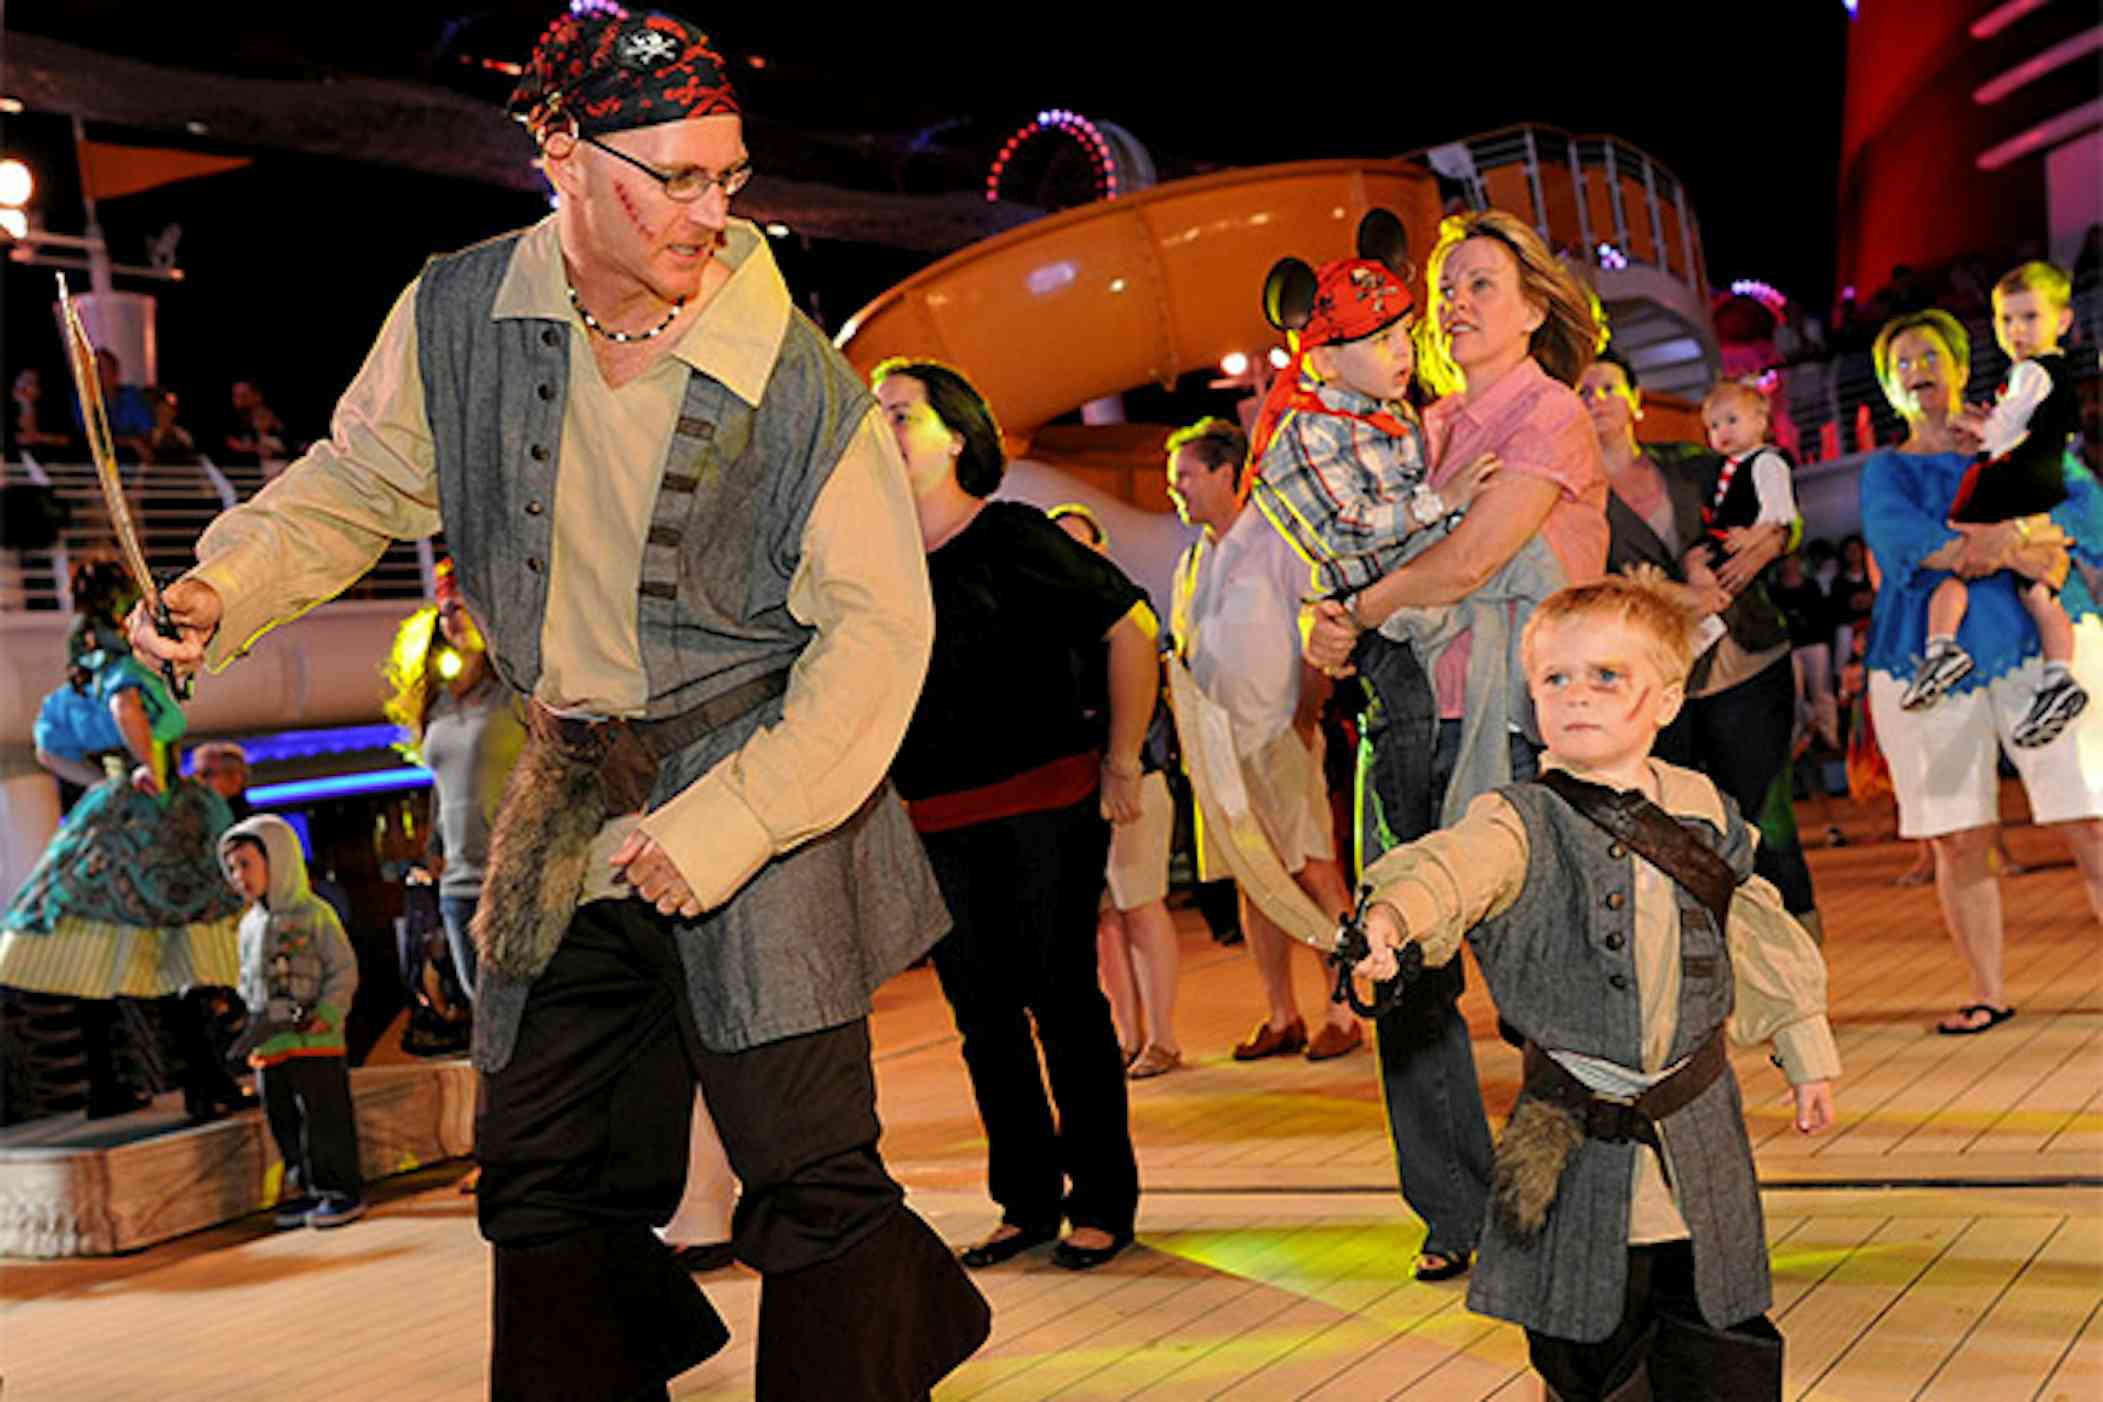 Disney Cruise Pirate Night: What to Expect